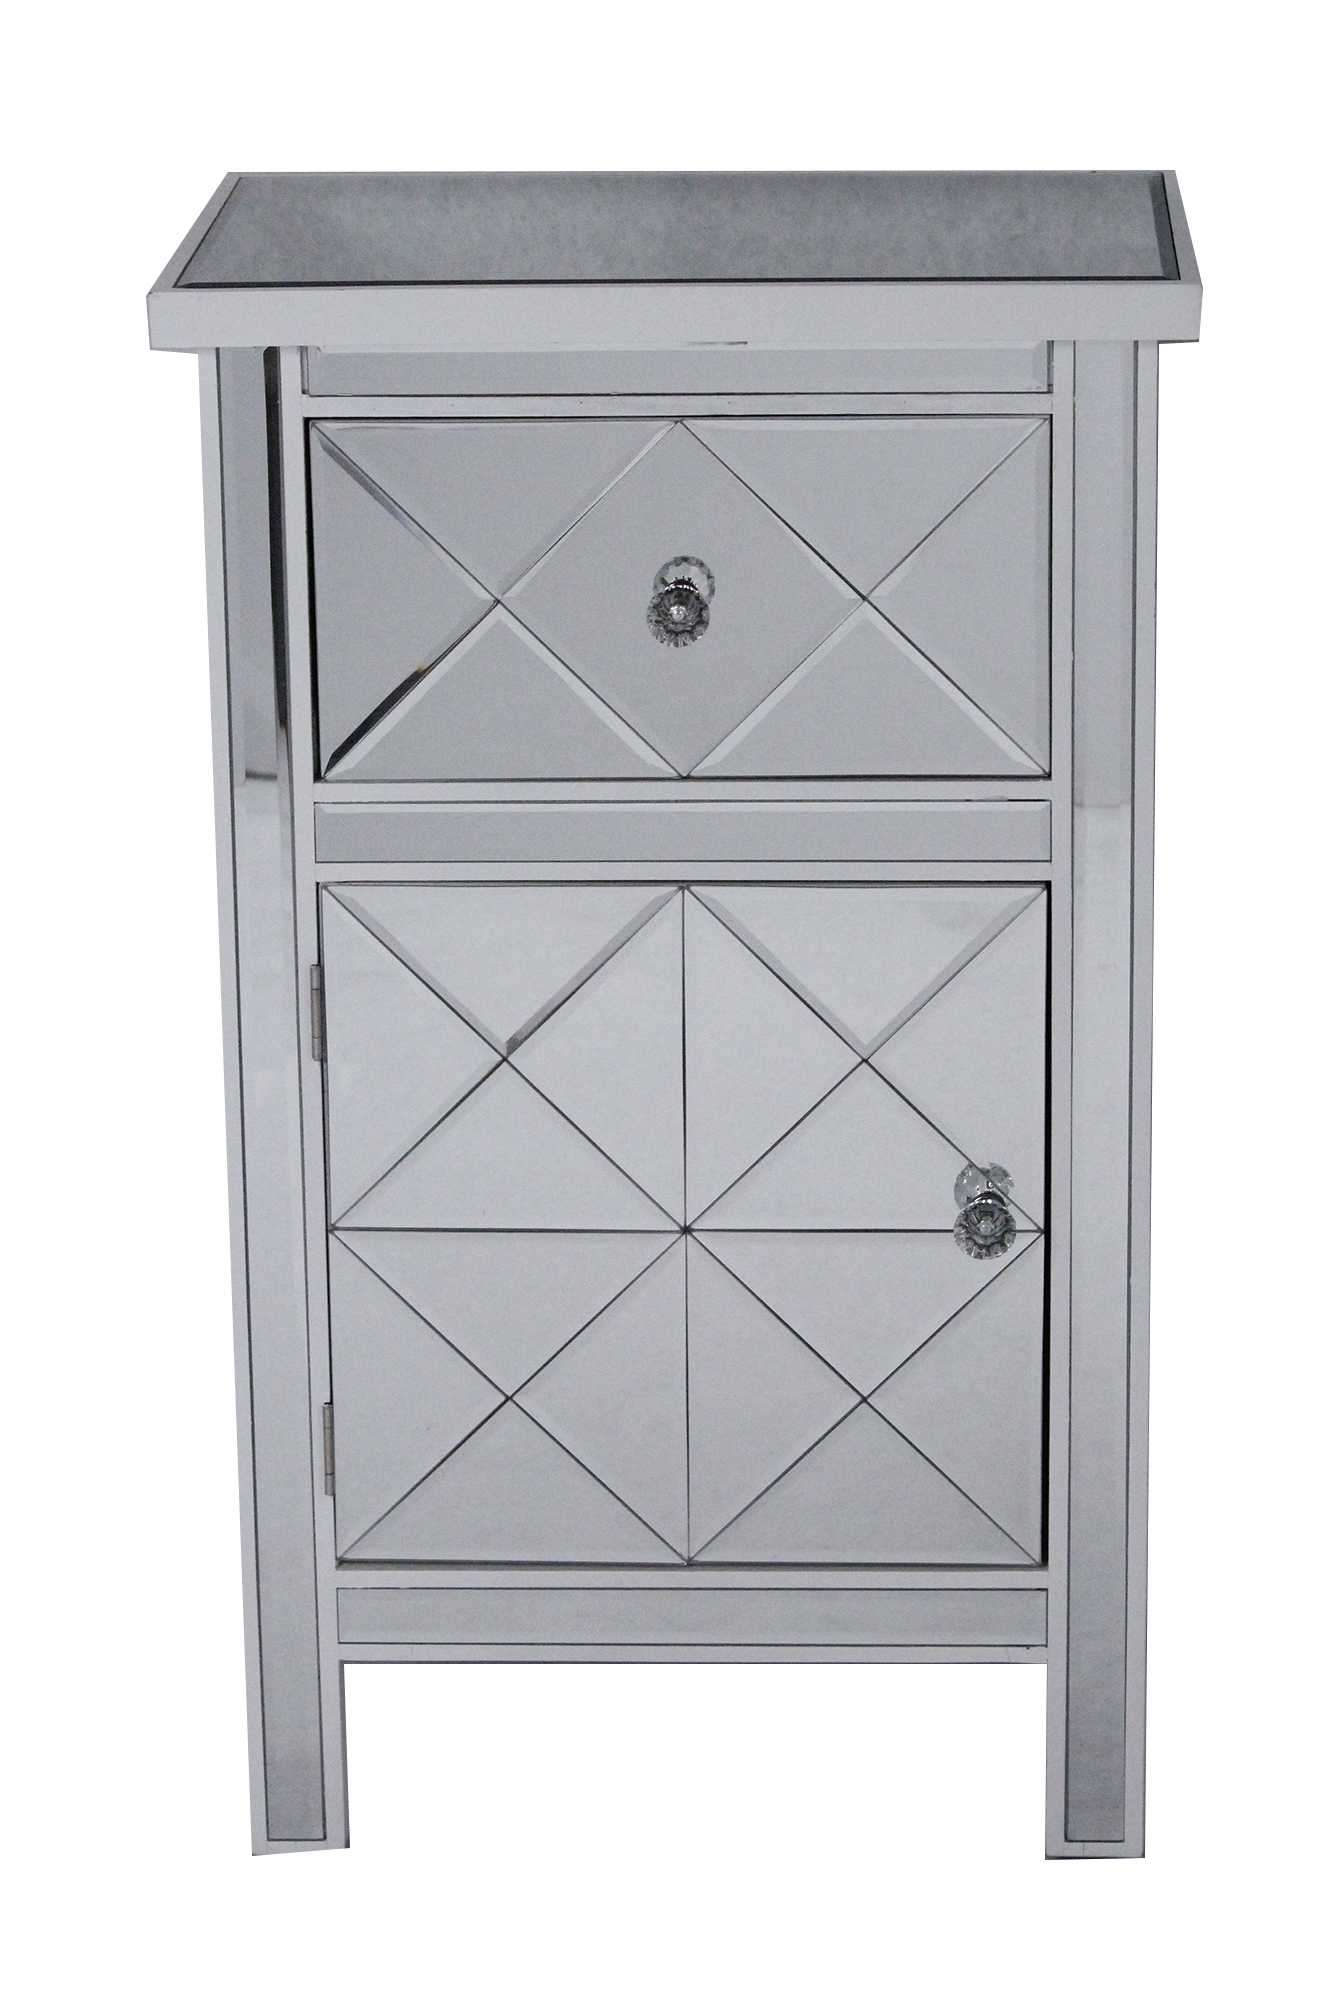 20" X 13" X 32.7" Antique White MDF Wood Mirrored Glass Cabinet with a Drawer and a Door